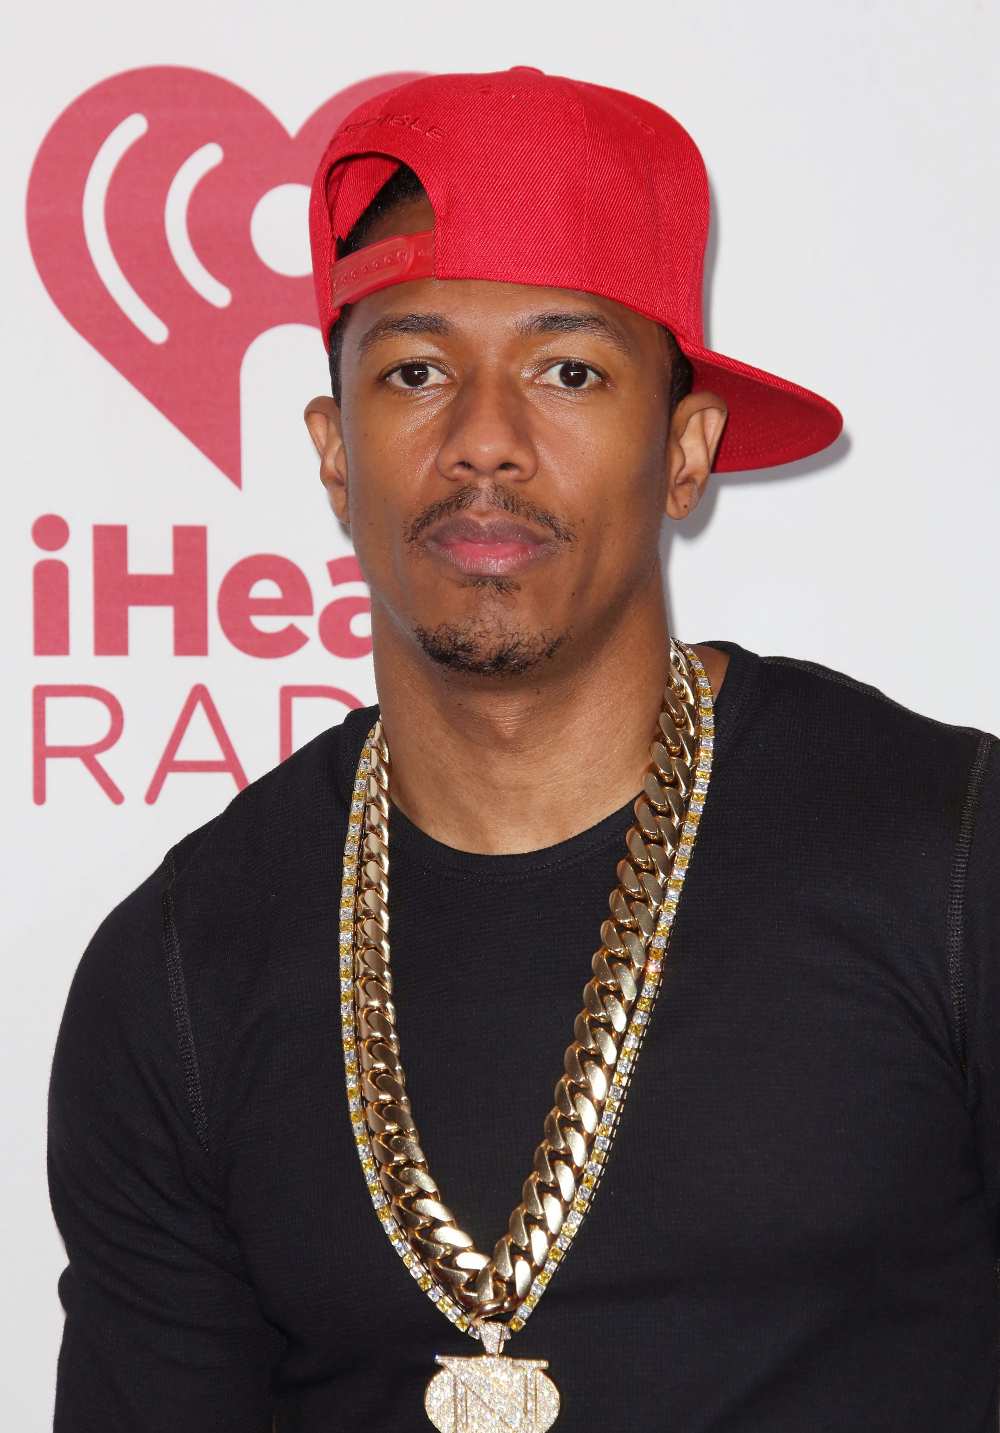 Nick Cannon: 'I Made a Lot of People Mad’ With Anti-Semitic Remarks, Apology